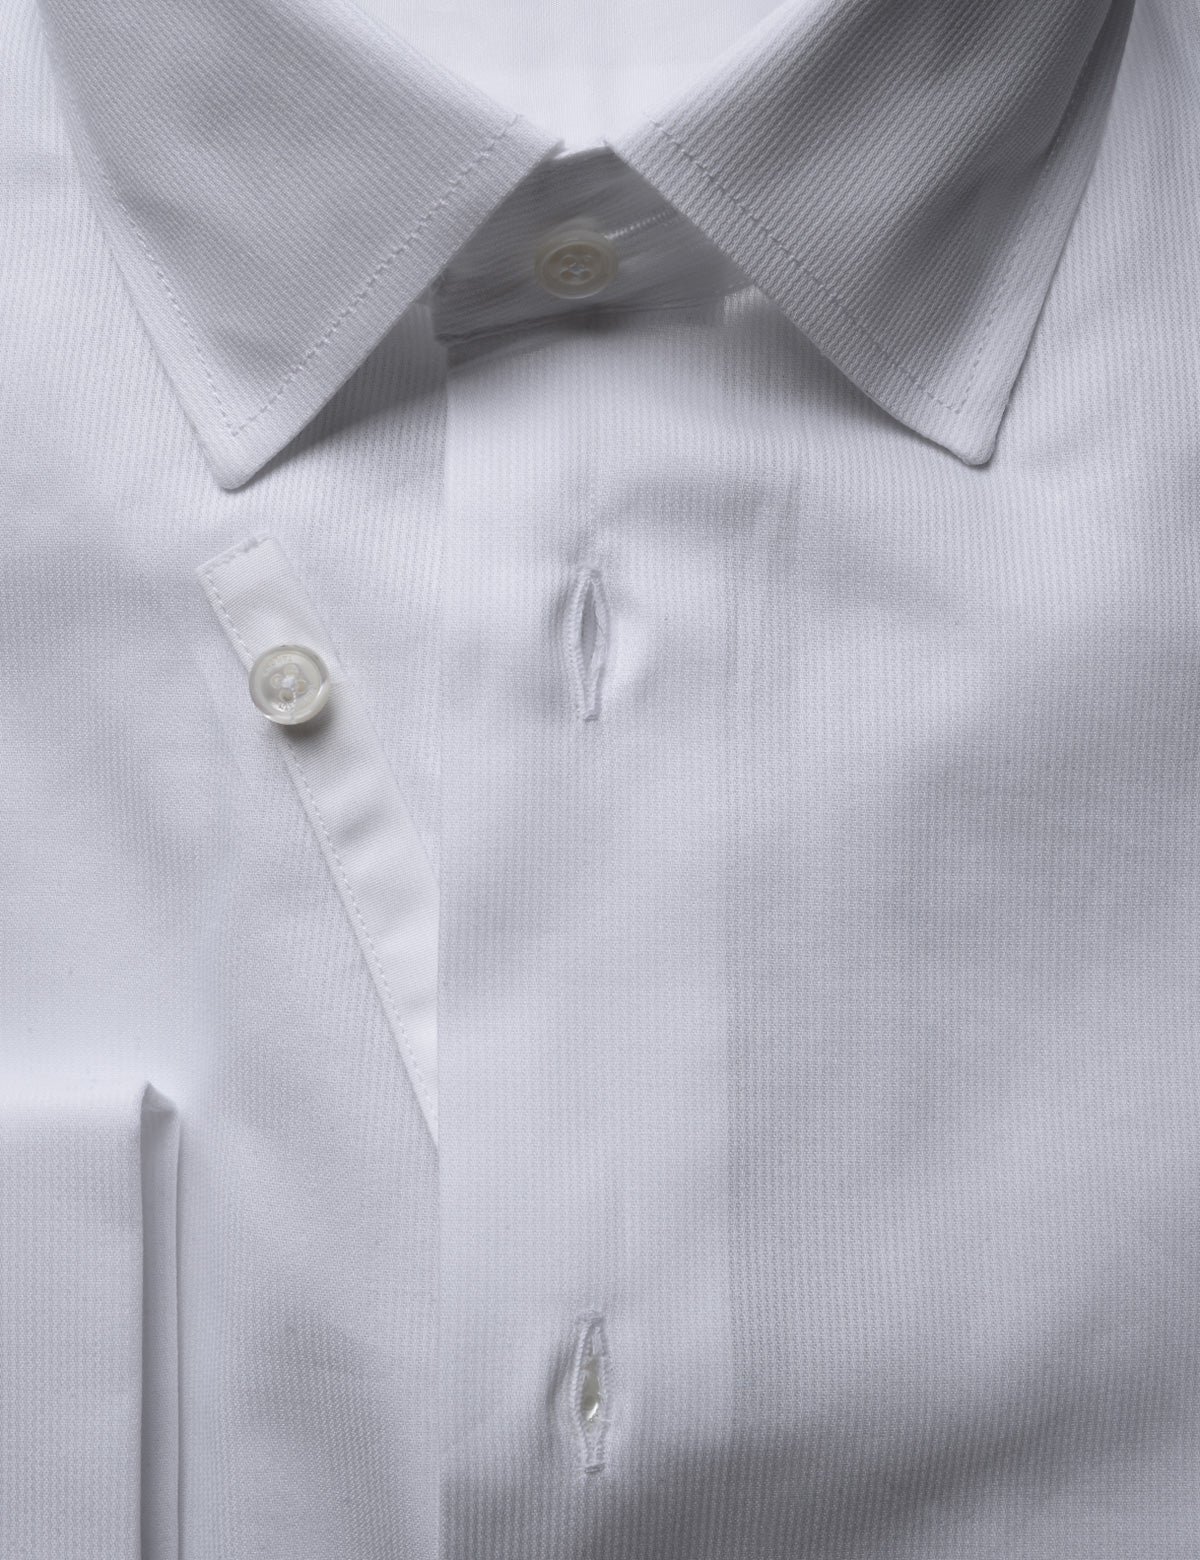 Detail showing removable button strip on French Cuff Tuxedo Shirt With Removeable Buttons - Bar Pique